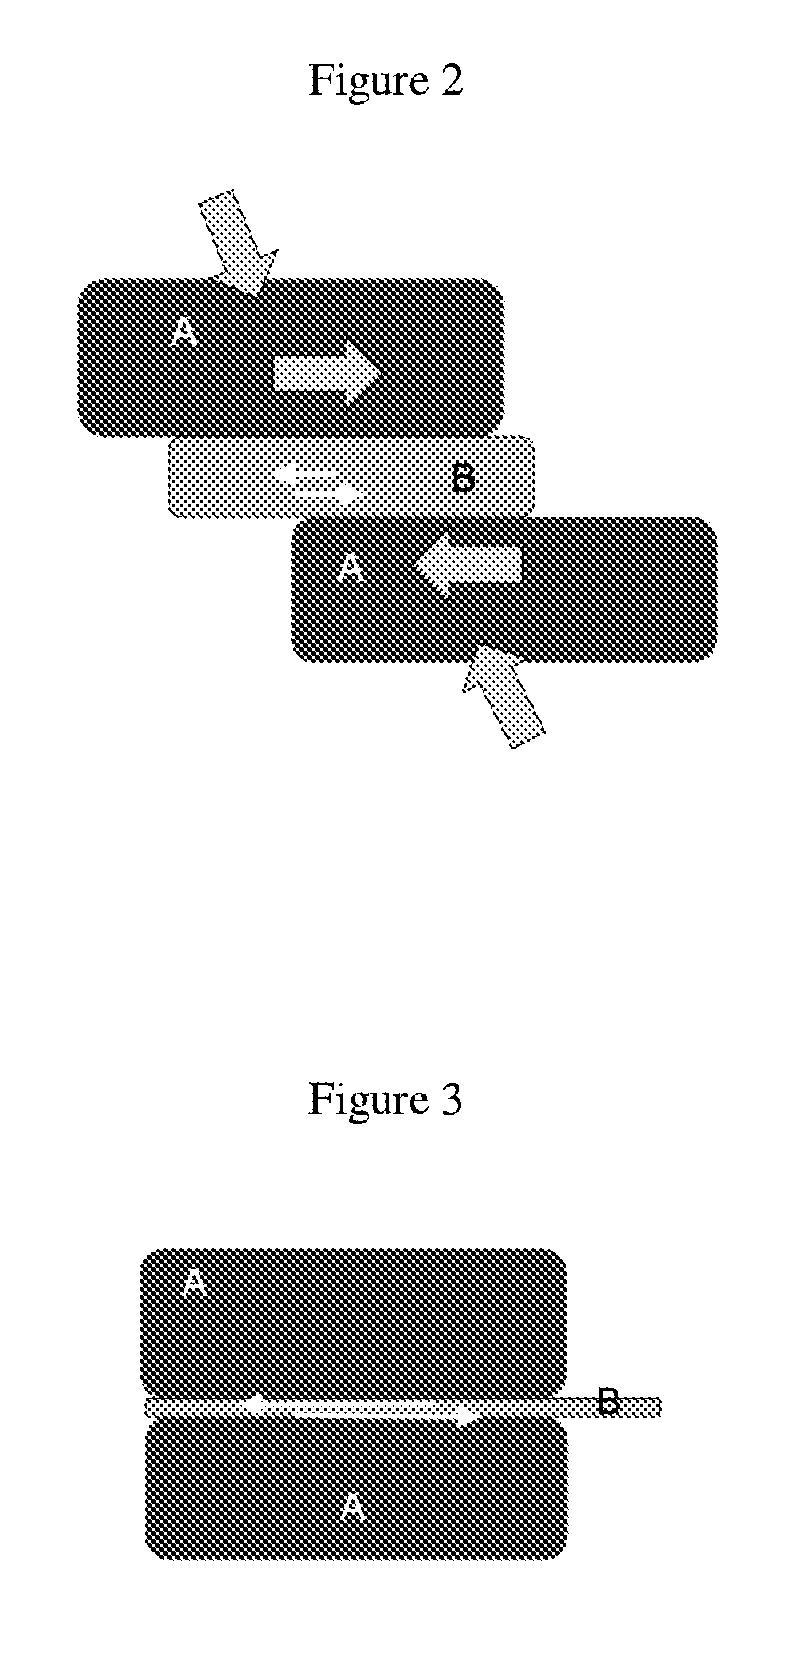 Cold gas spray coating methods and compositions